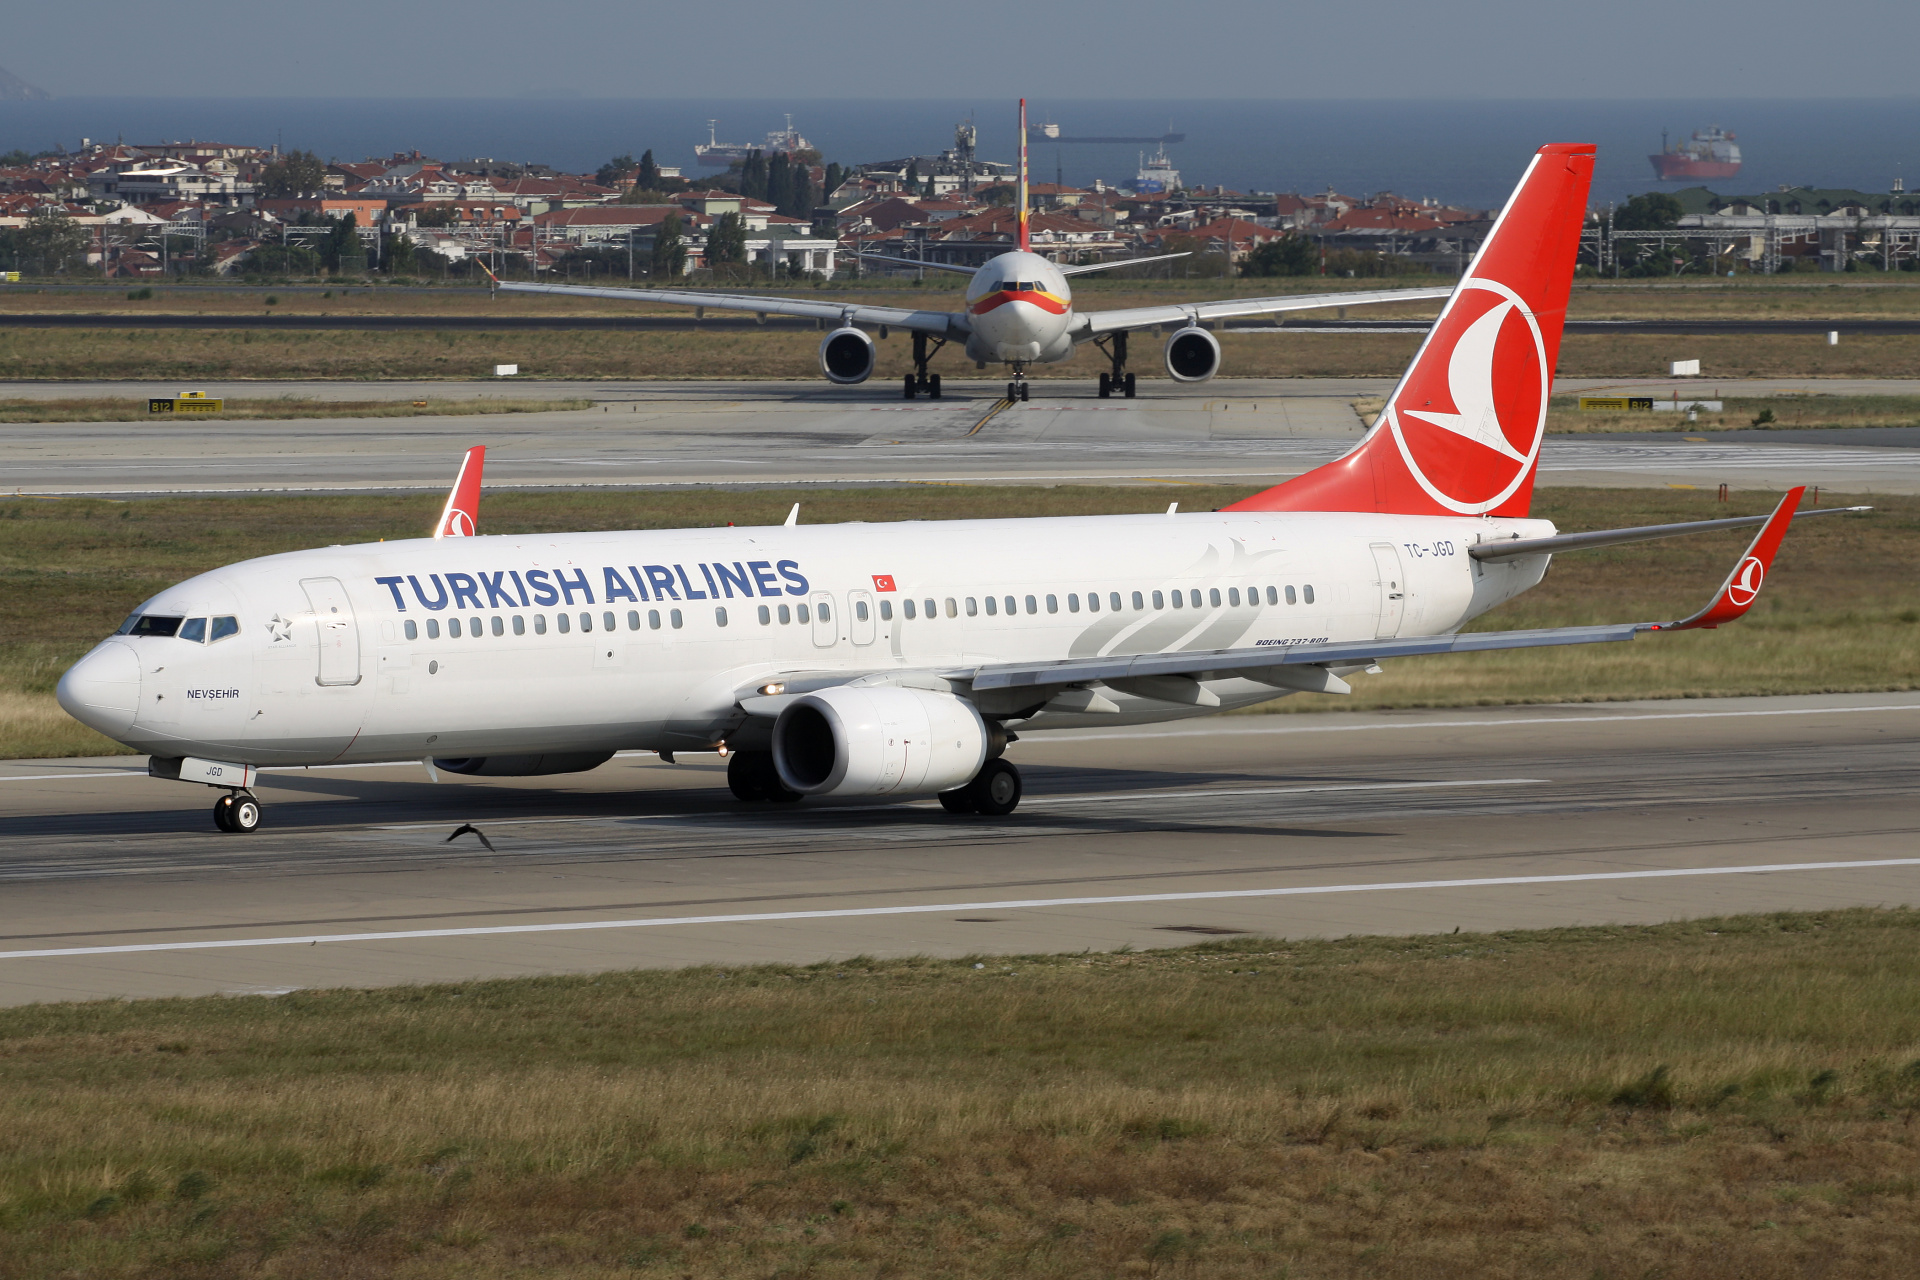 TC-JGD (Aircraft » Istanbul Atatürk Airport » Boeing 737-800 » THY Turkish Airlines)